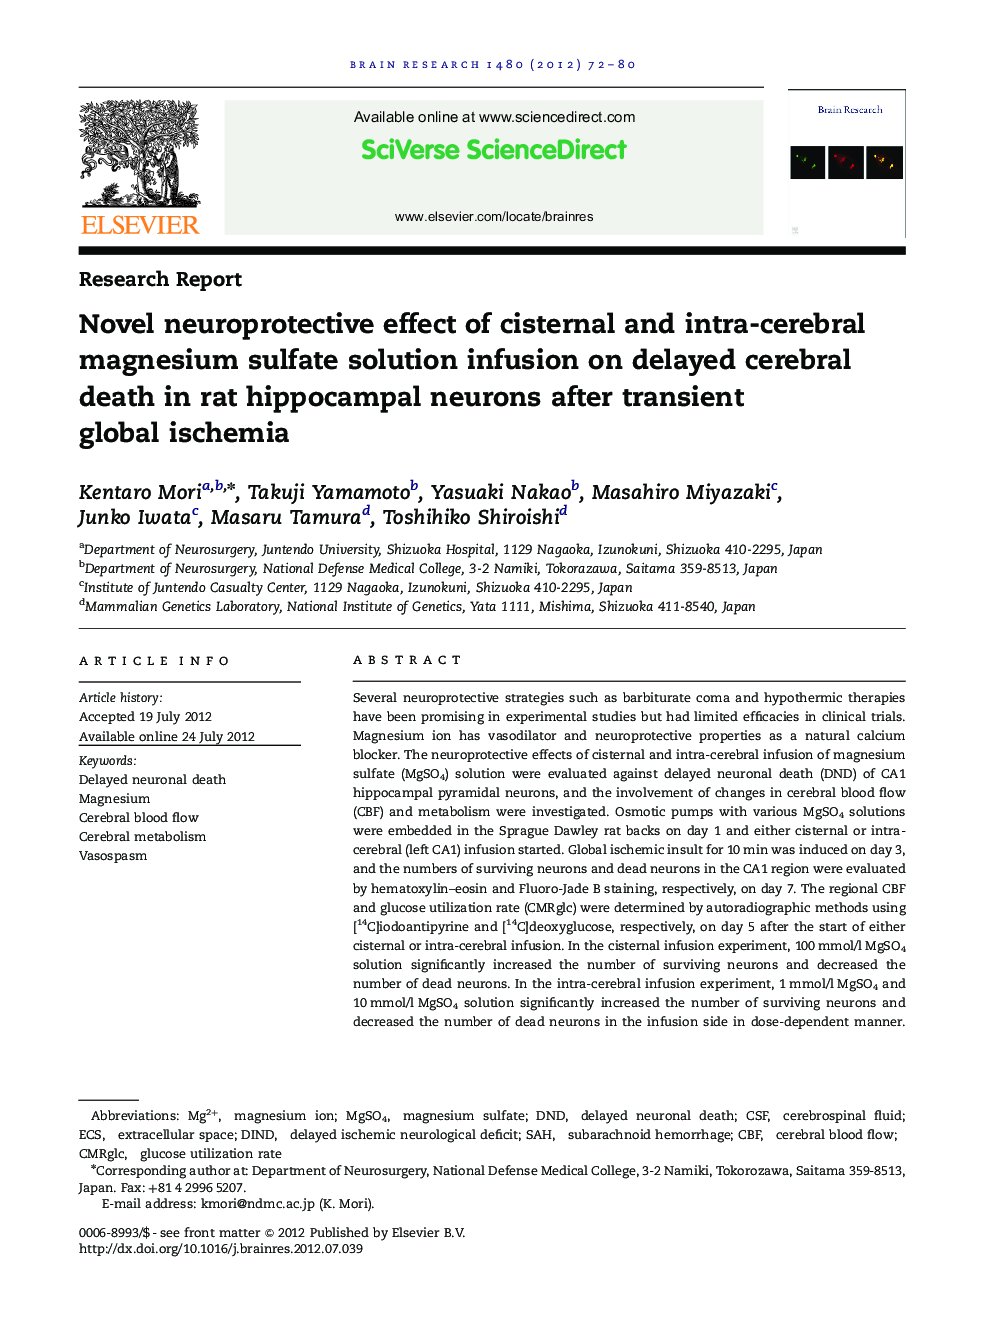 Research ReportNovel neuroprotective effect of cisternal and intra-cerebral magnesium sulfate solution infusion on delayed cerebral death in rat hippocampal neurons after transient global ischemia